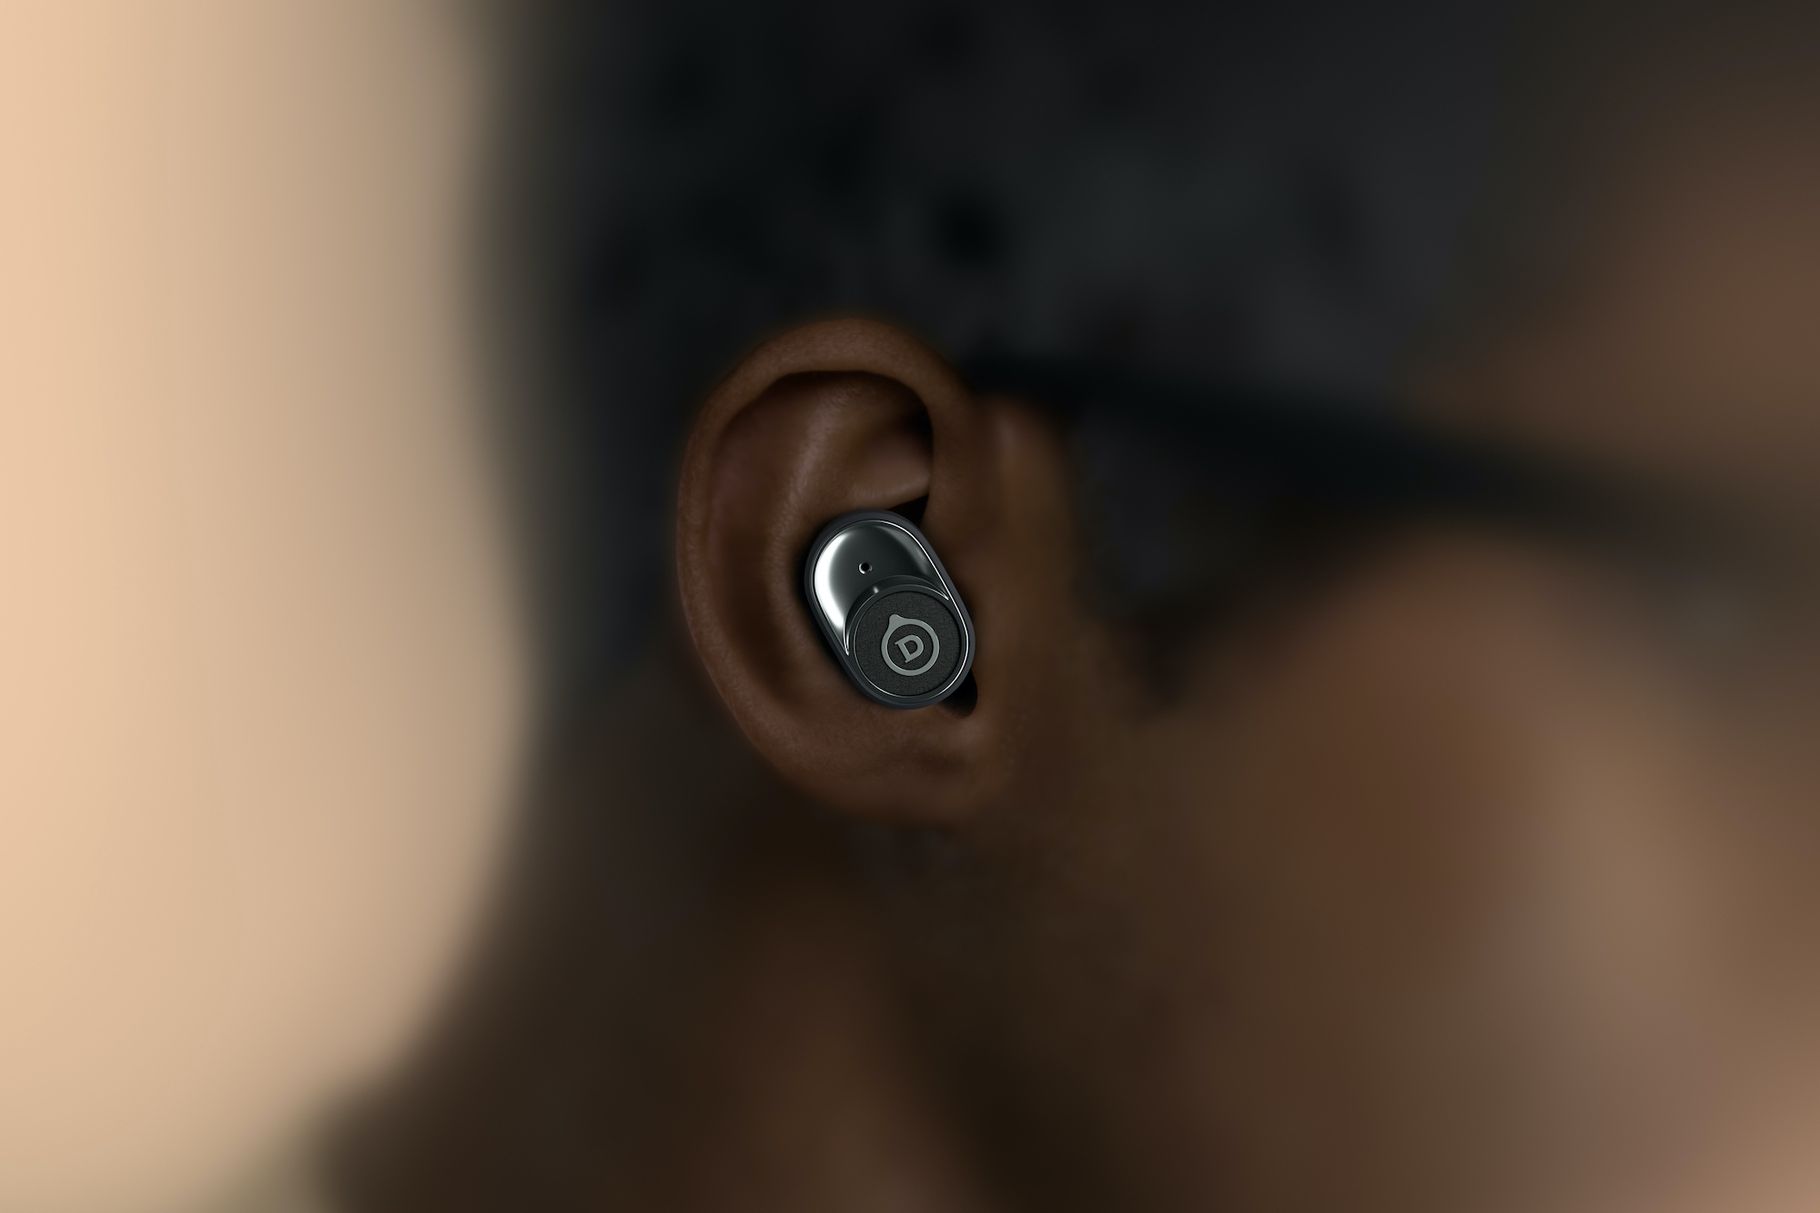 Devialet announce their new $299 Gemini truly wireless earbuds with ANC